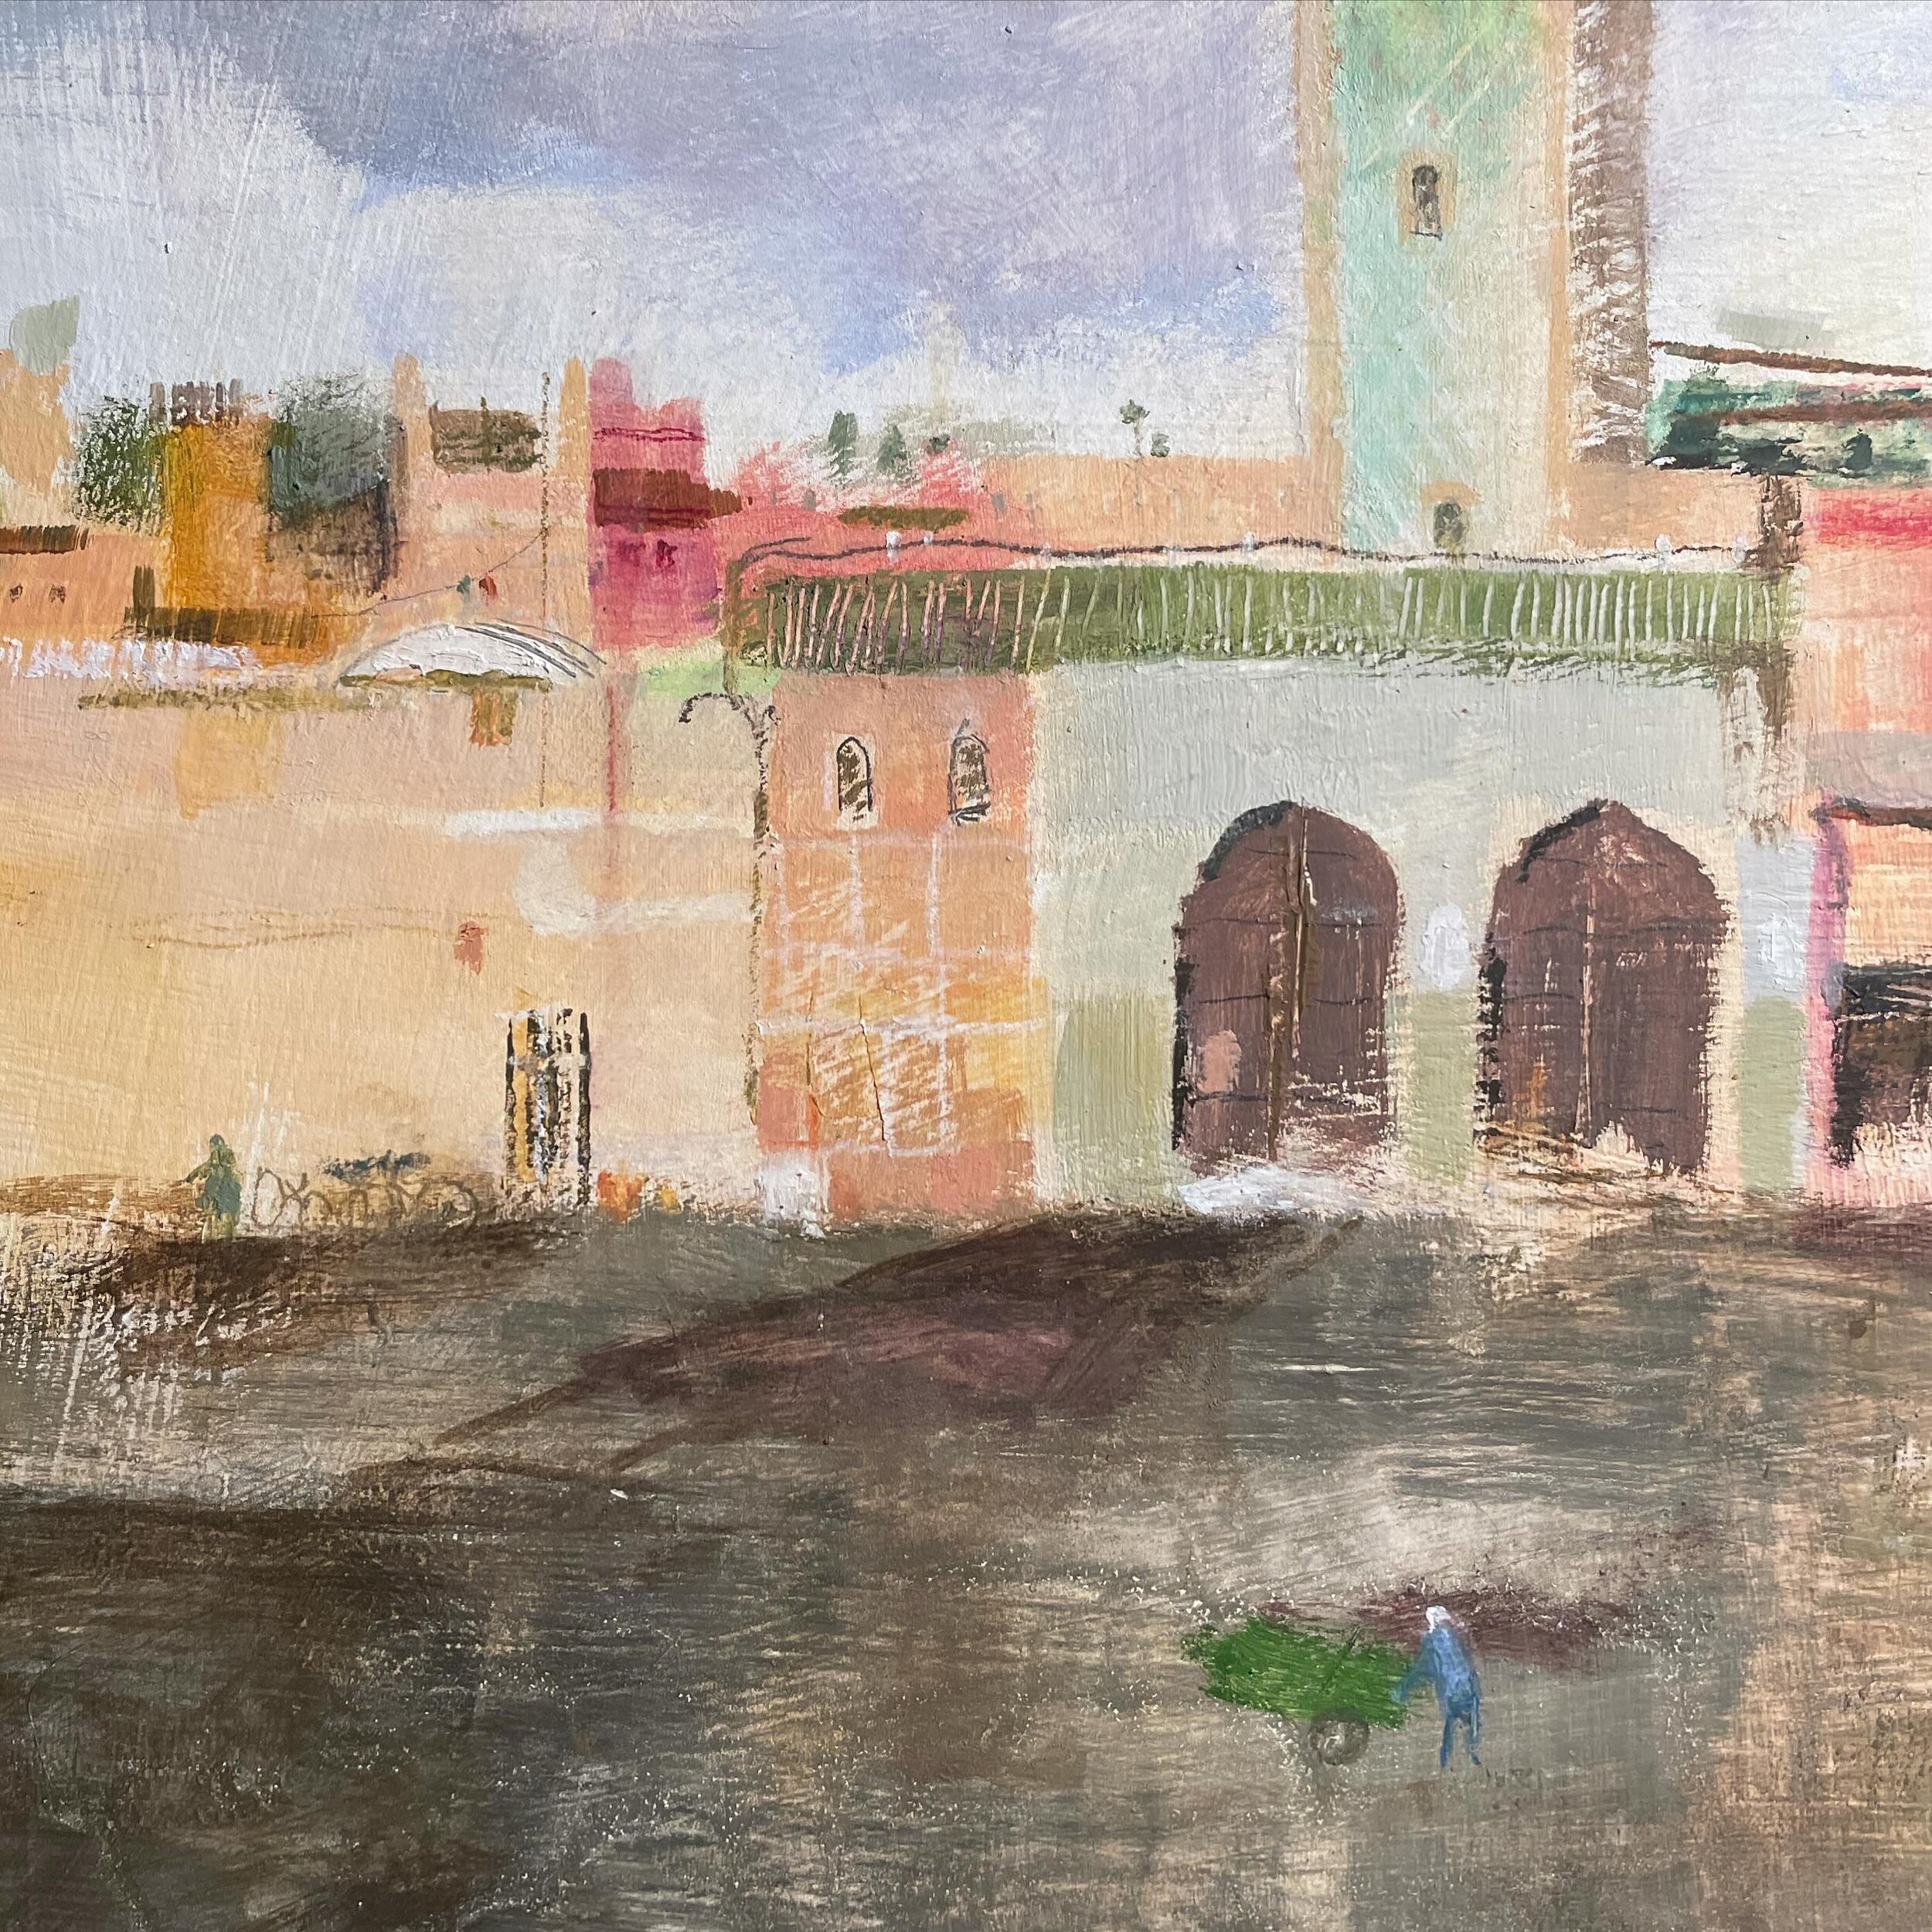 Today&rsquo;s post: detail from the in progress Marrakesh. Trying to work on bigger, more complex images has been a good challenge. Plugging a way and enjoying the attic studio. Feeling so grateful to have this new space. Gonna post some shots of it 